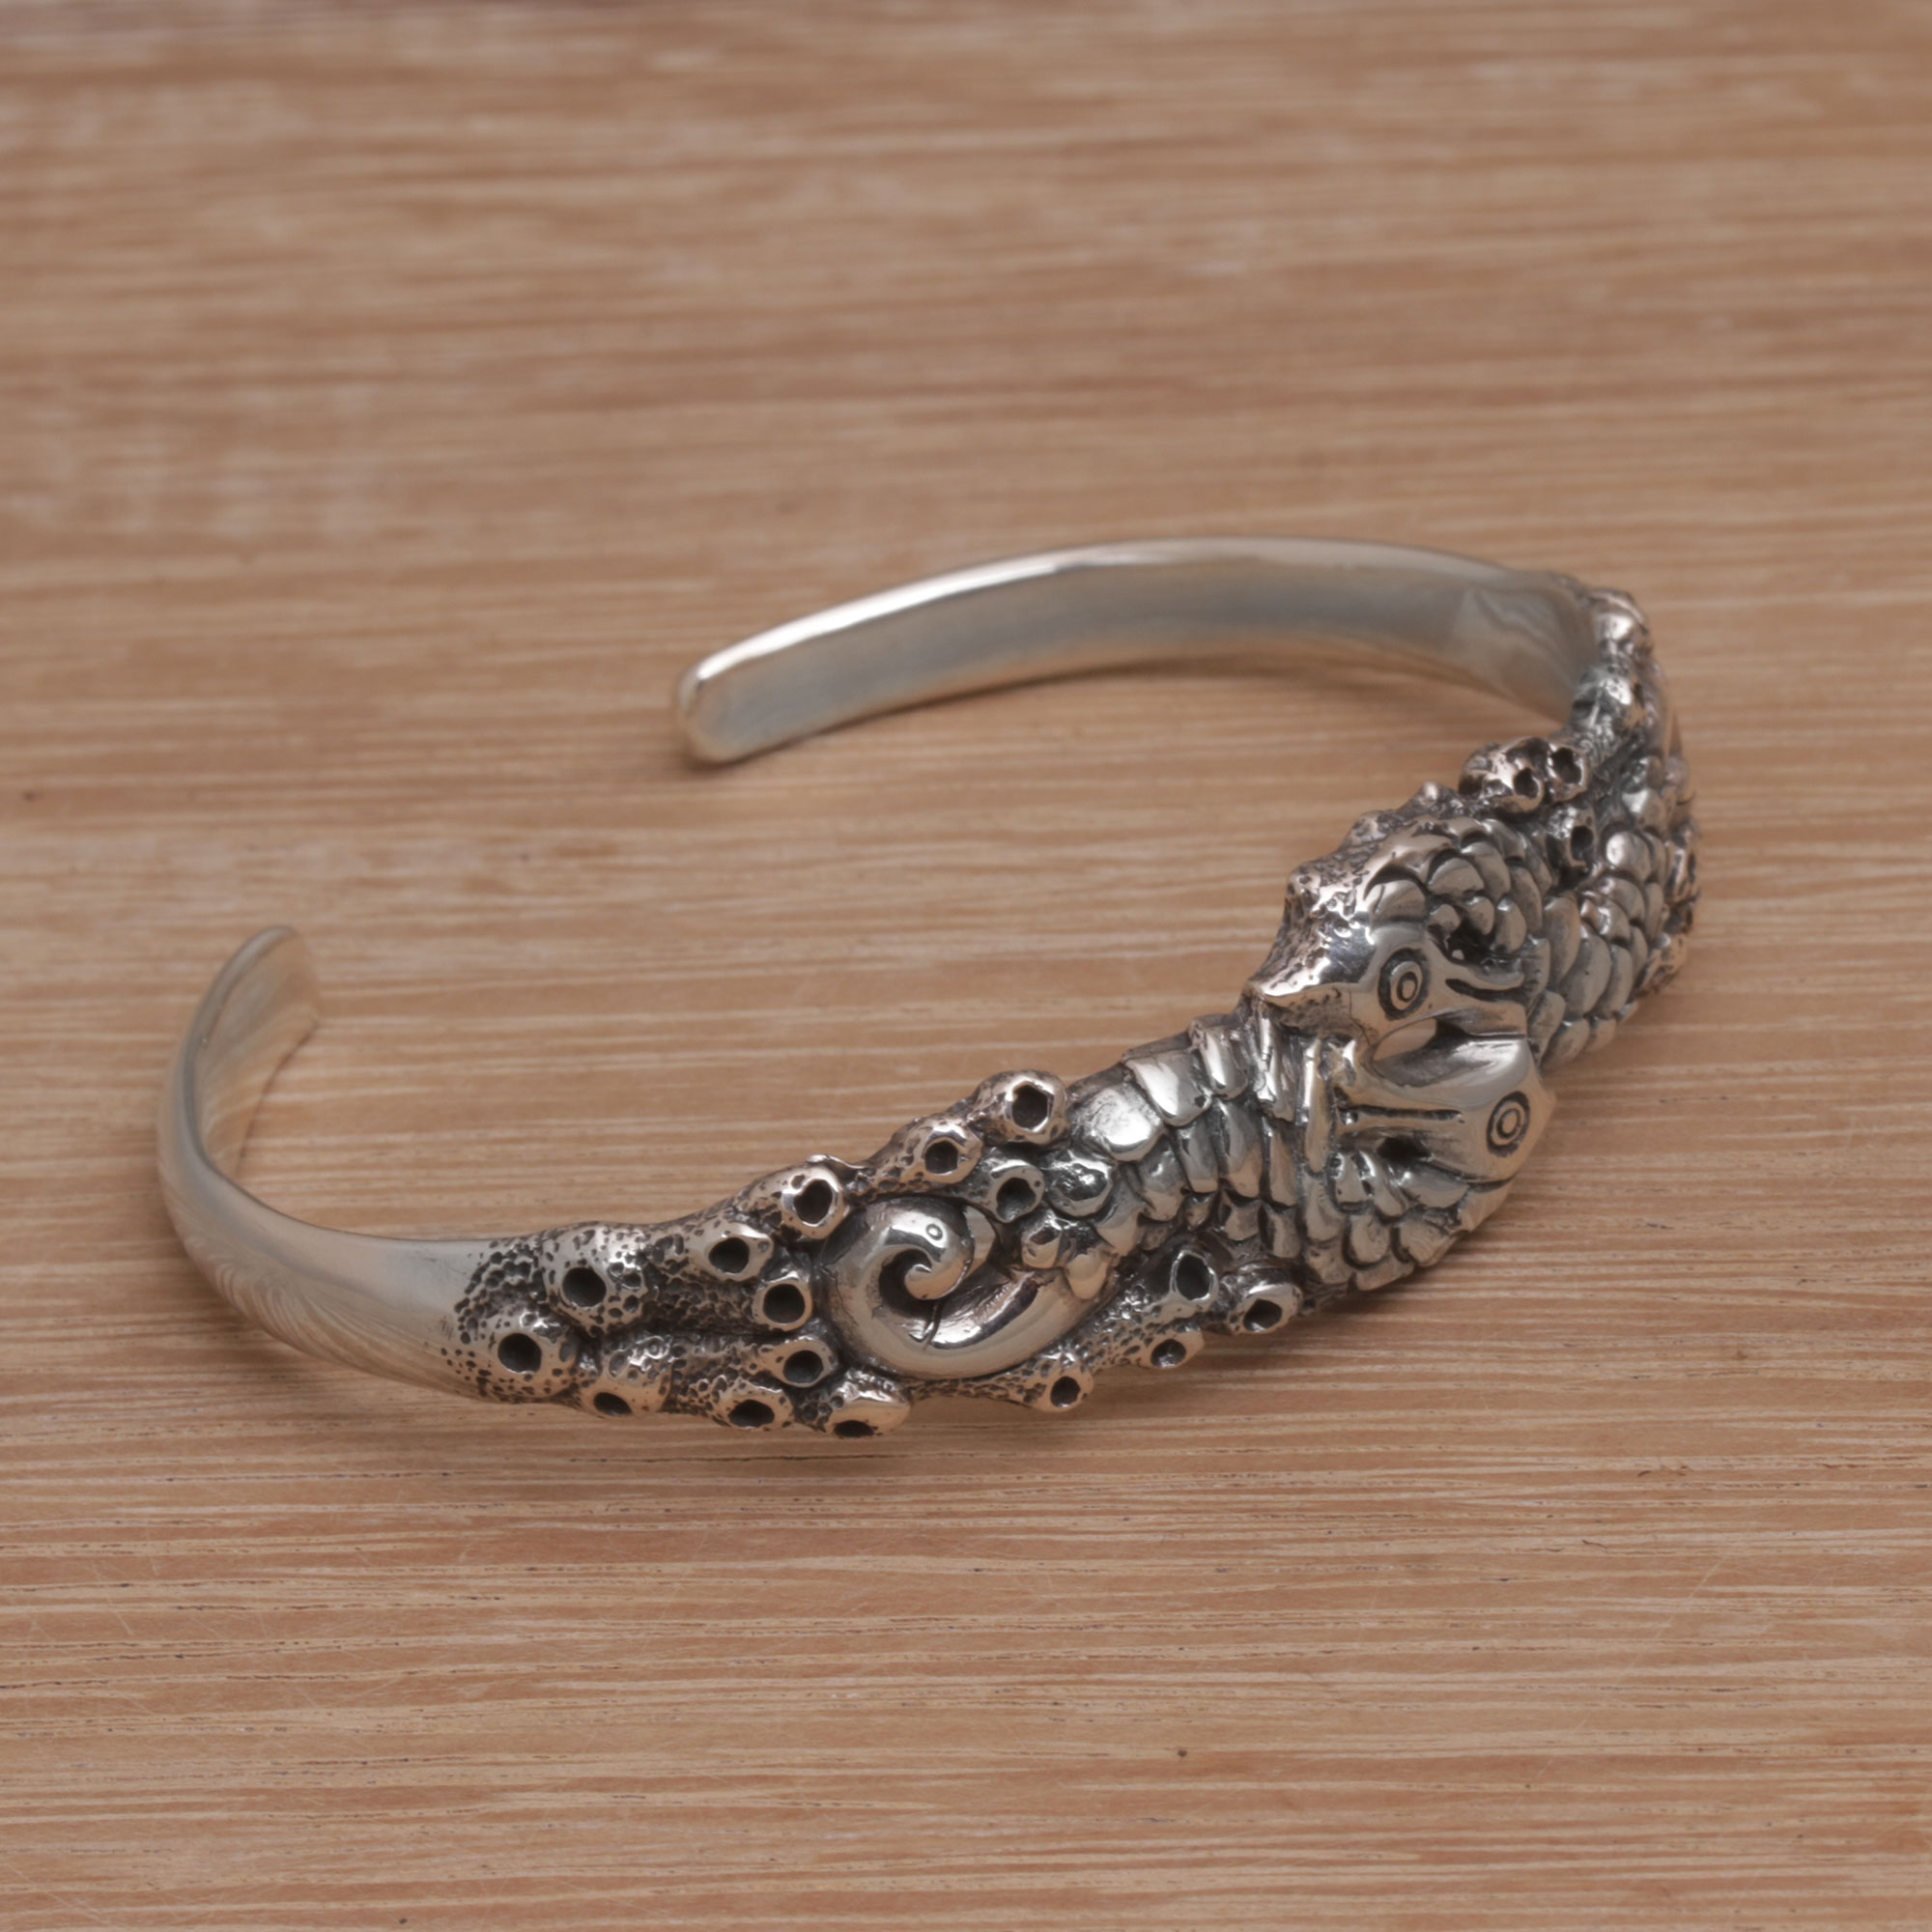 Indonesia 925 Sterling Silver Seahorse Cuff Bracelet - Seahorse Family ...